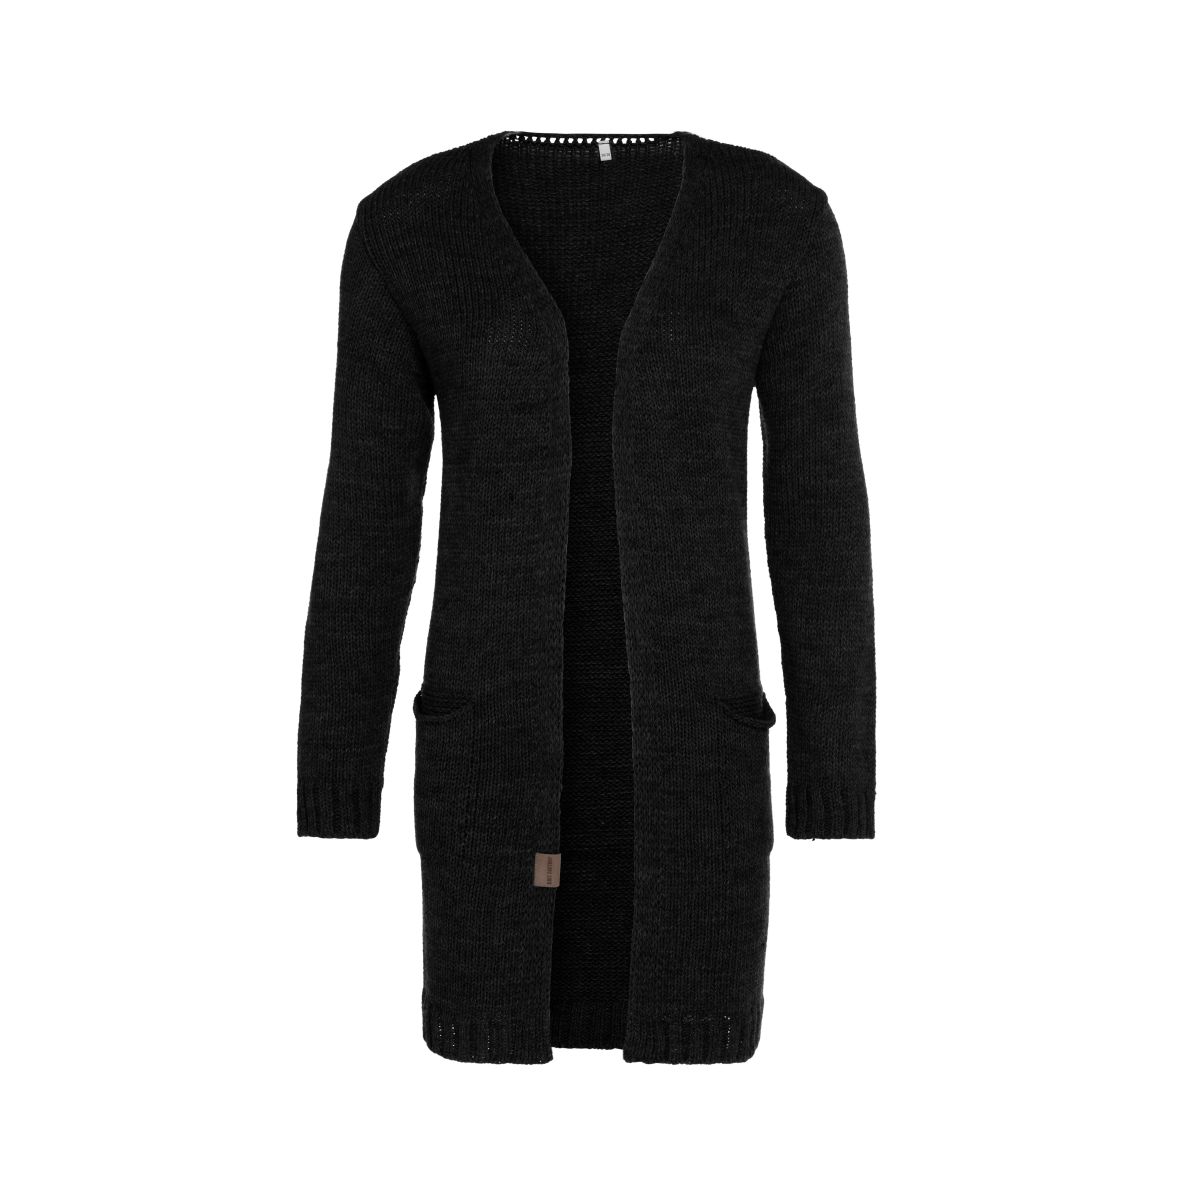 ruby knitted cardigan black 4042 with side pockets